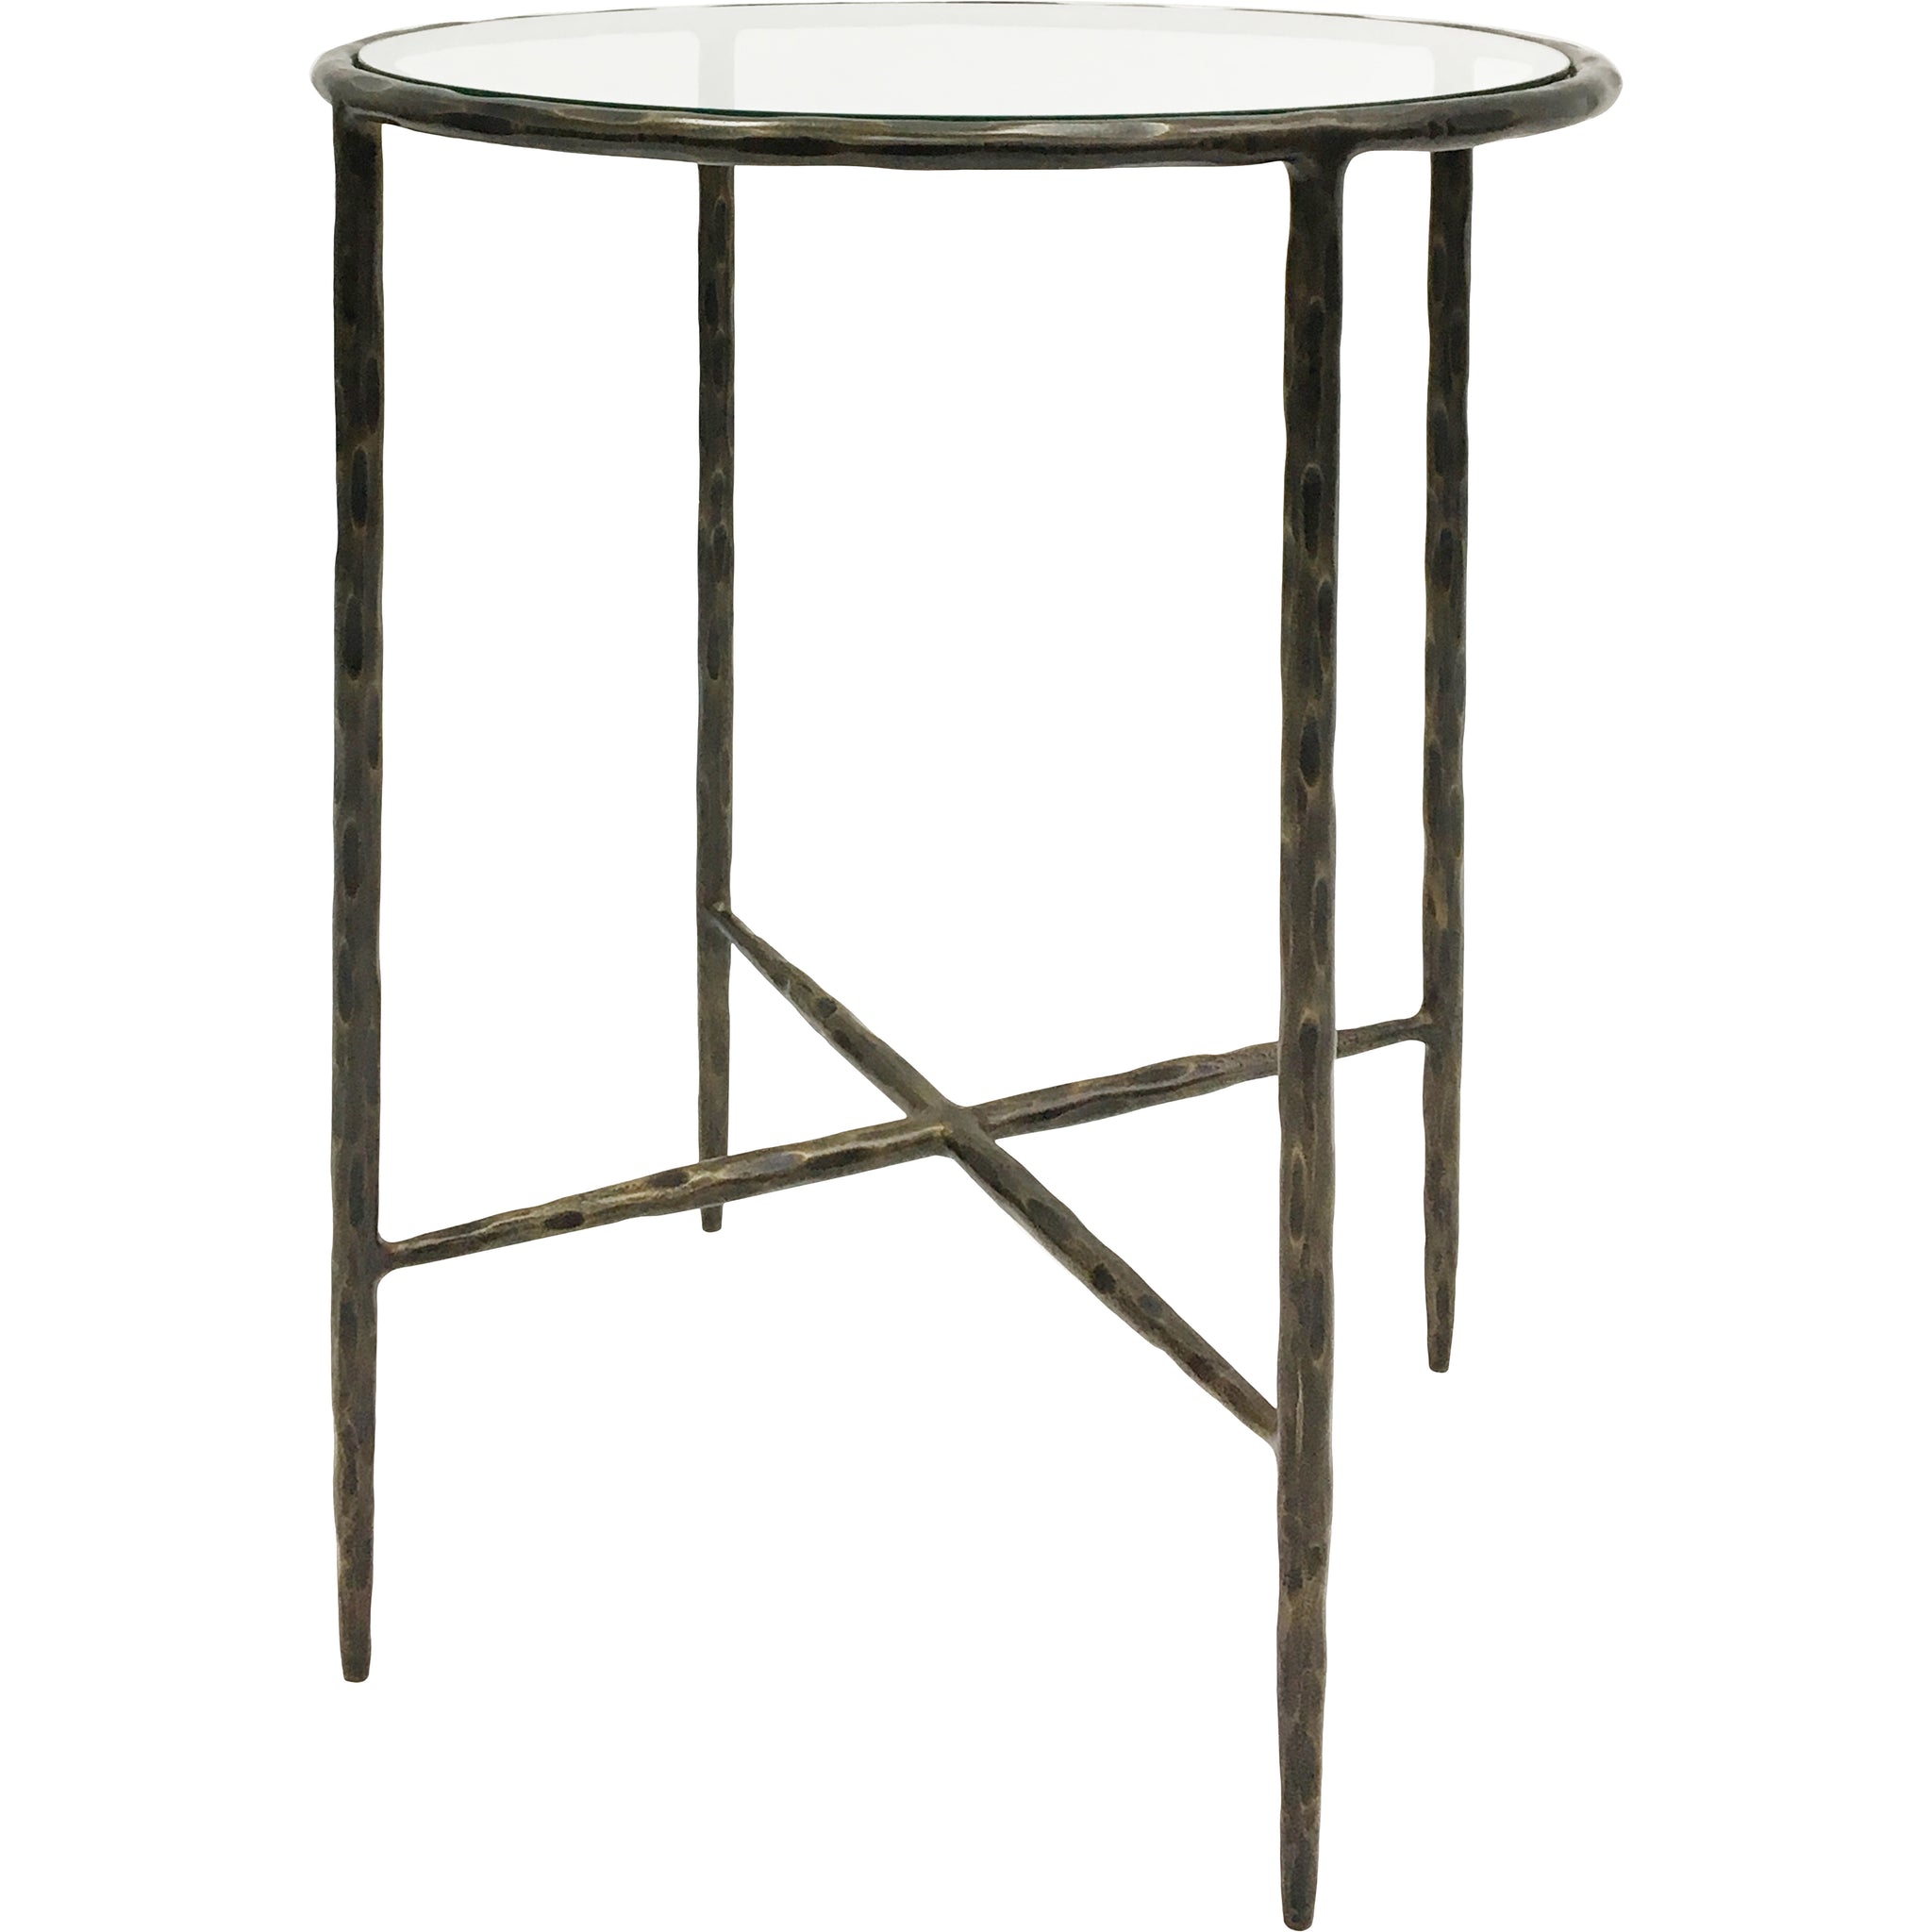 Dalton Hand Forged Side Table Dark Bronze Finish with Glass Top